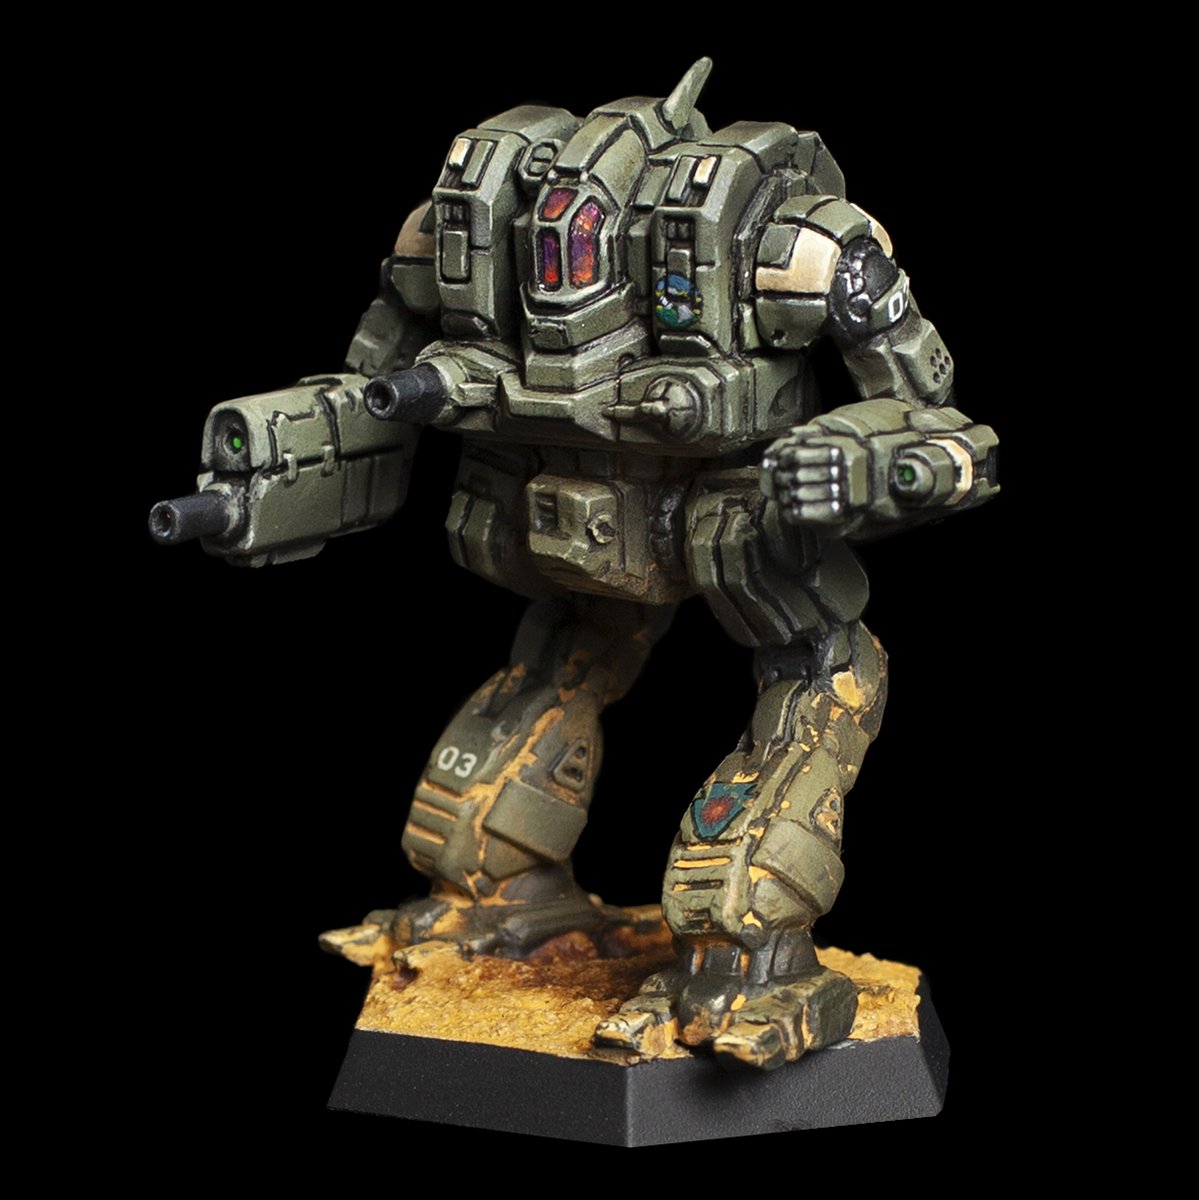 The march of the white horses continues. Cataphract CTF-3D in sheme 1st St. Ives Lancers/ St. Ives Armored Cavalry
#battletech #mechwarrior